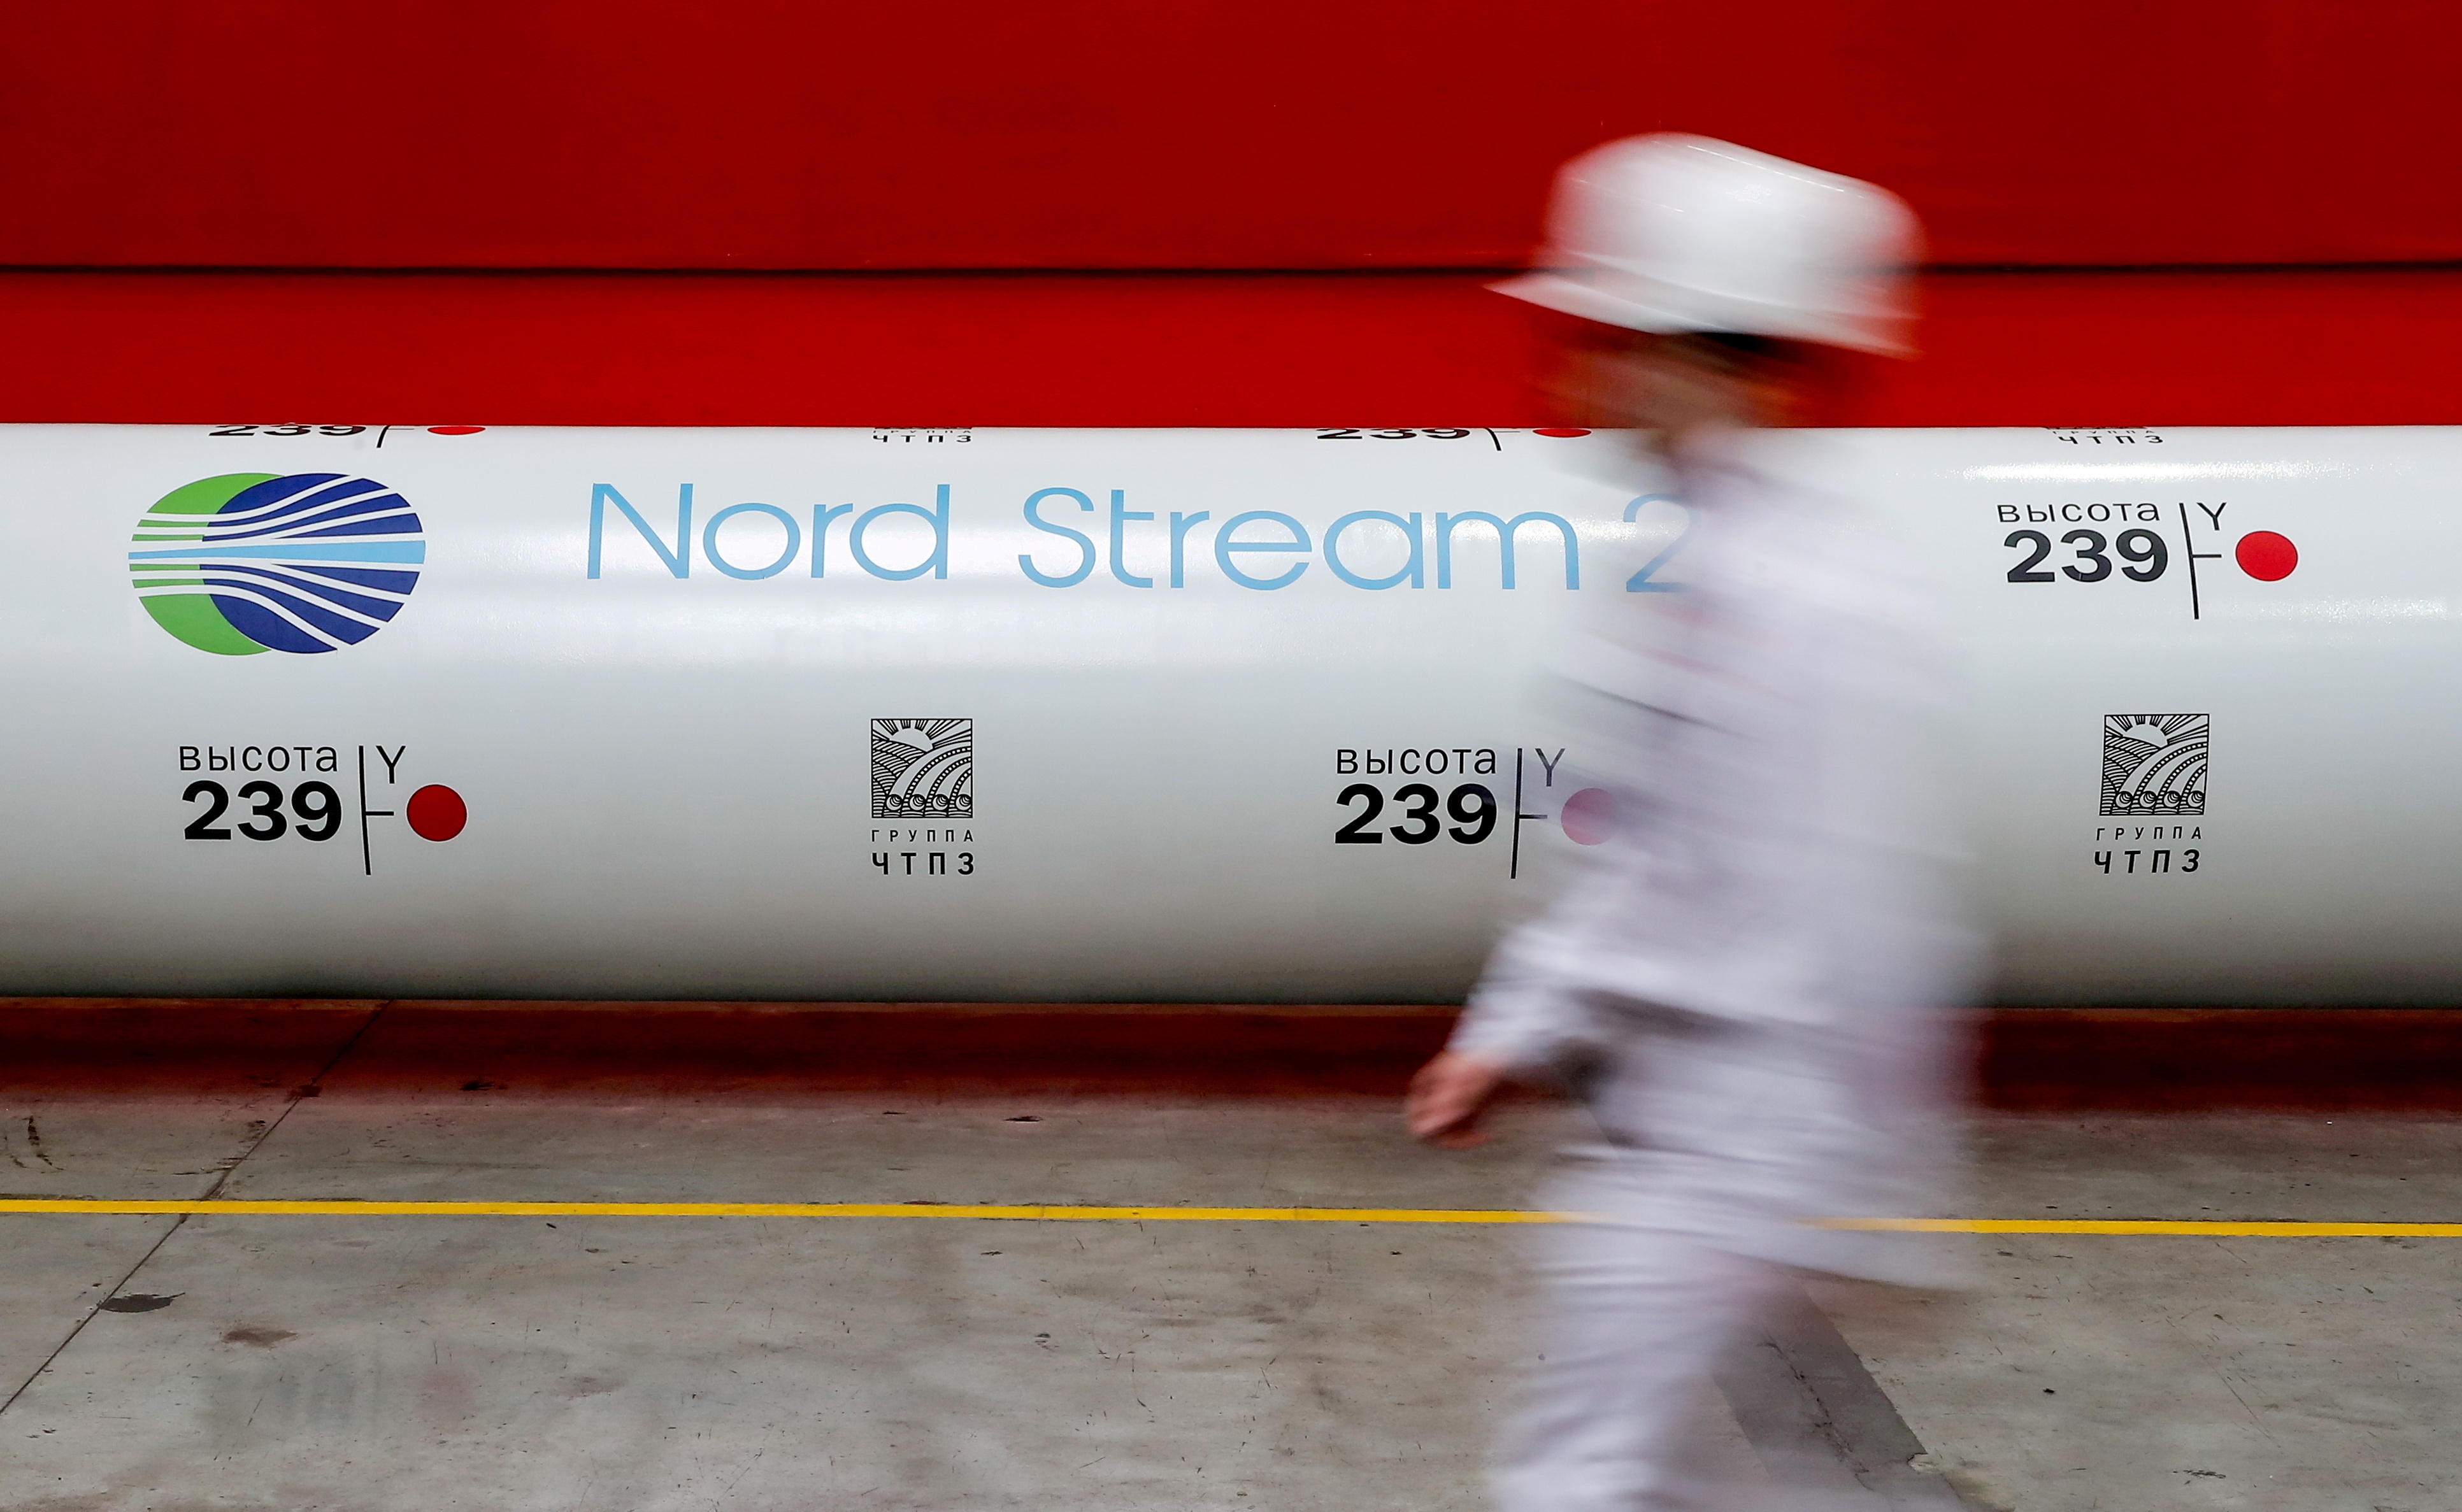 The first Nord Stream 2 line was filled with technical gas